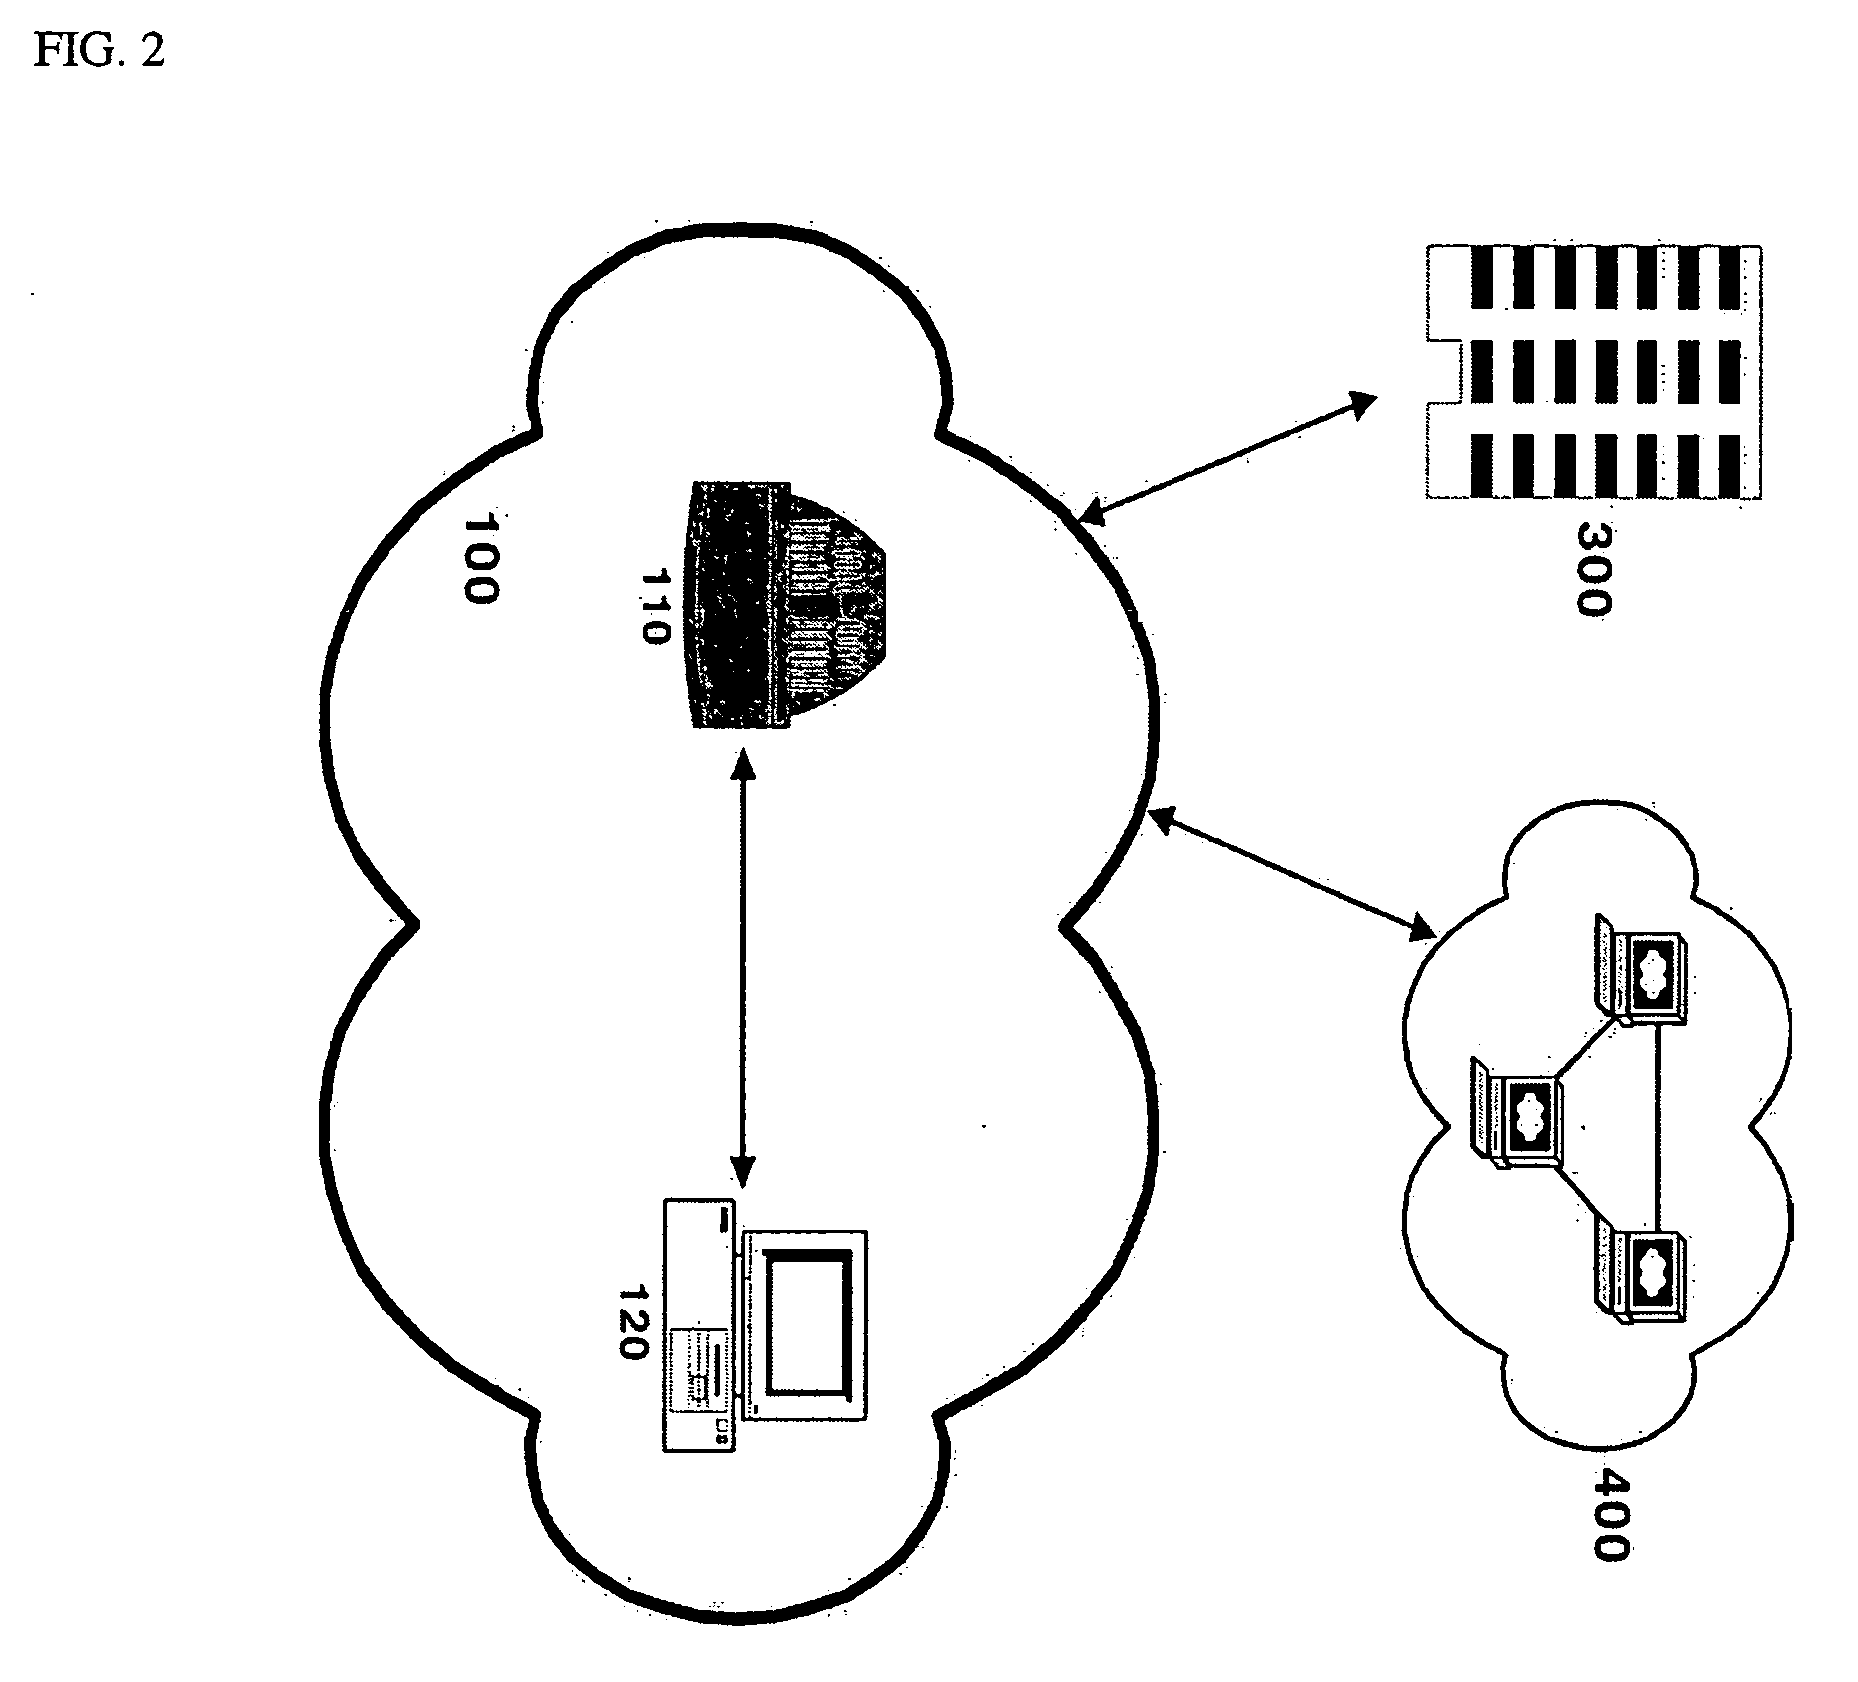 Network device and method for providing content compatibility between network devices having different respective digital rights management methods